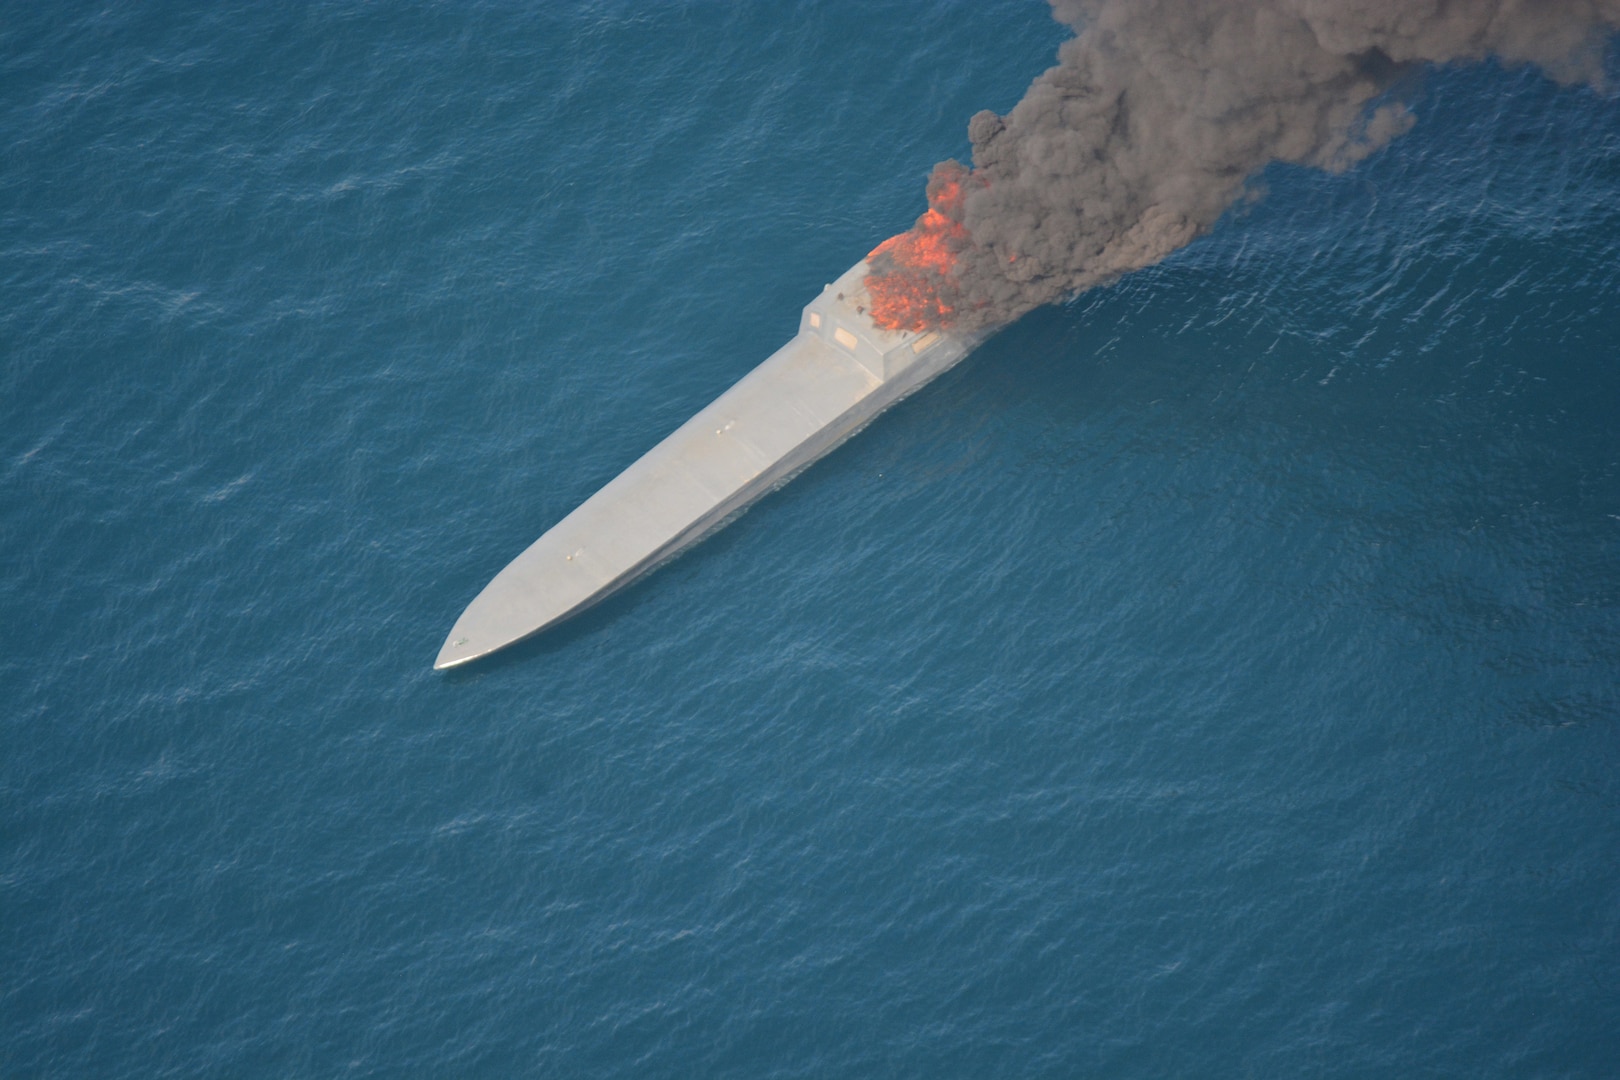 A suspected smuggling vessel on fire in the Pacific Ocean.